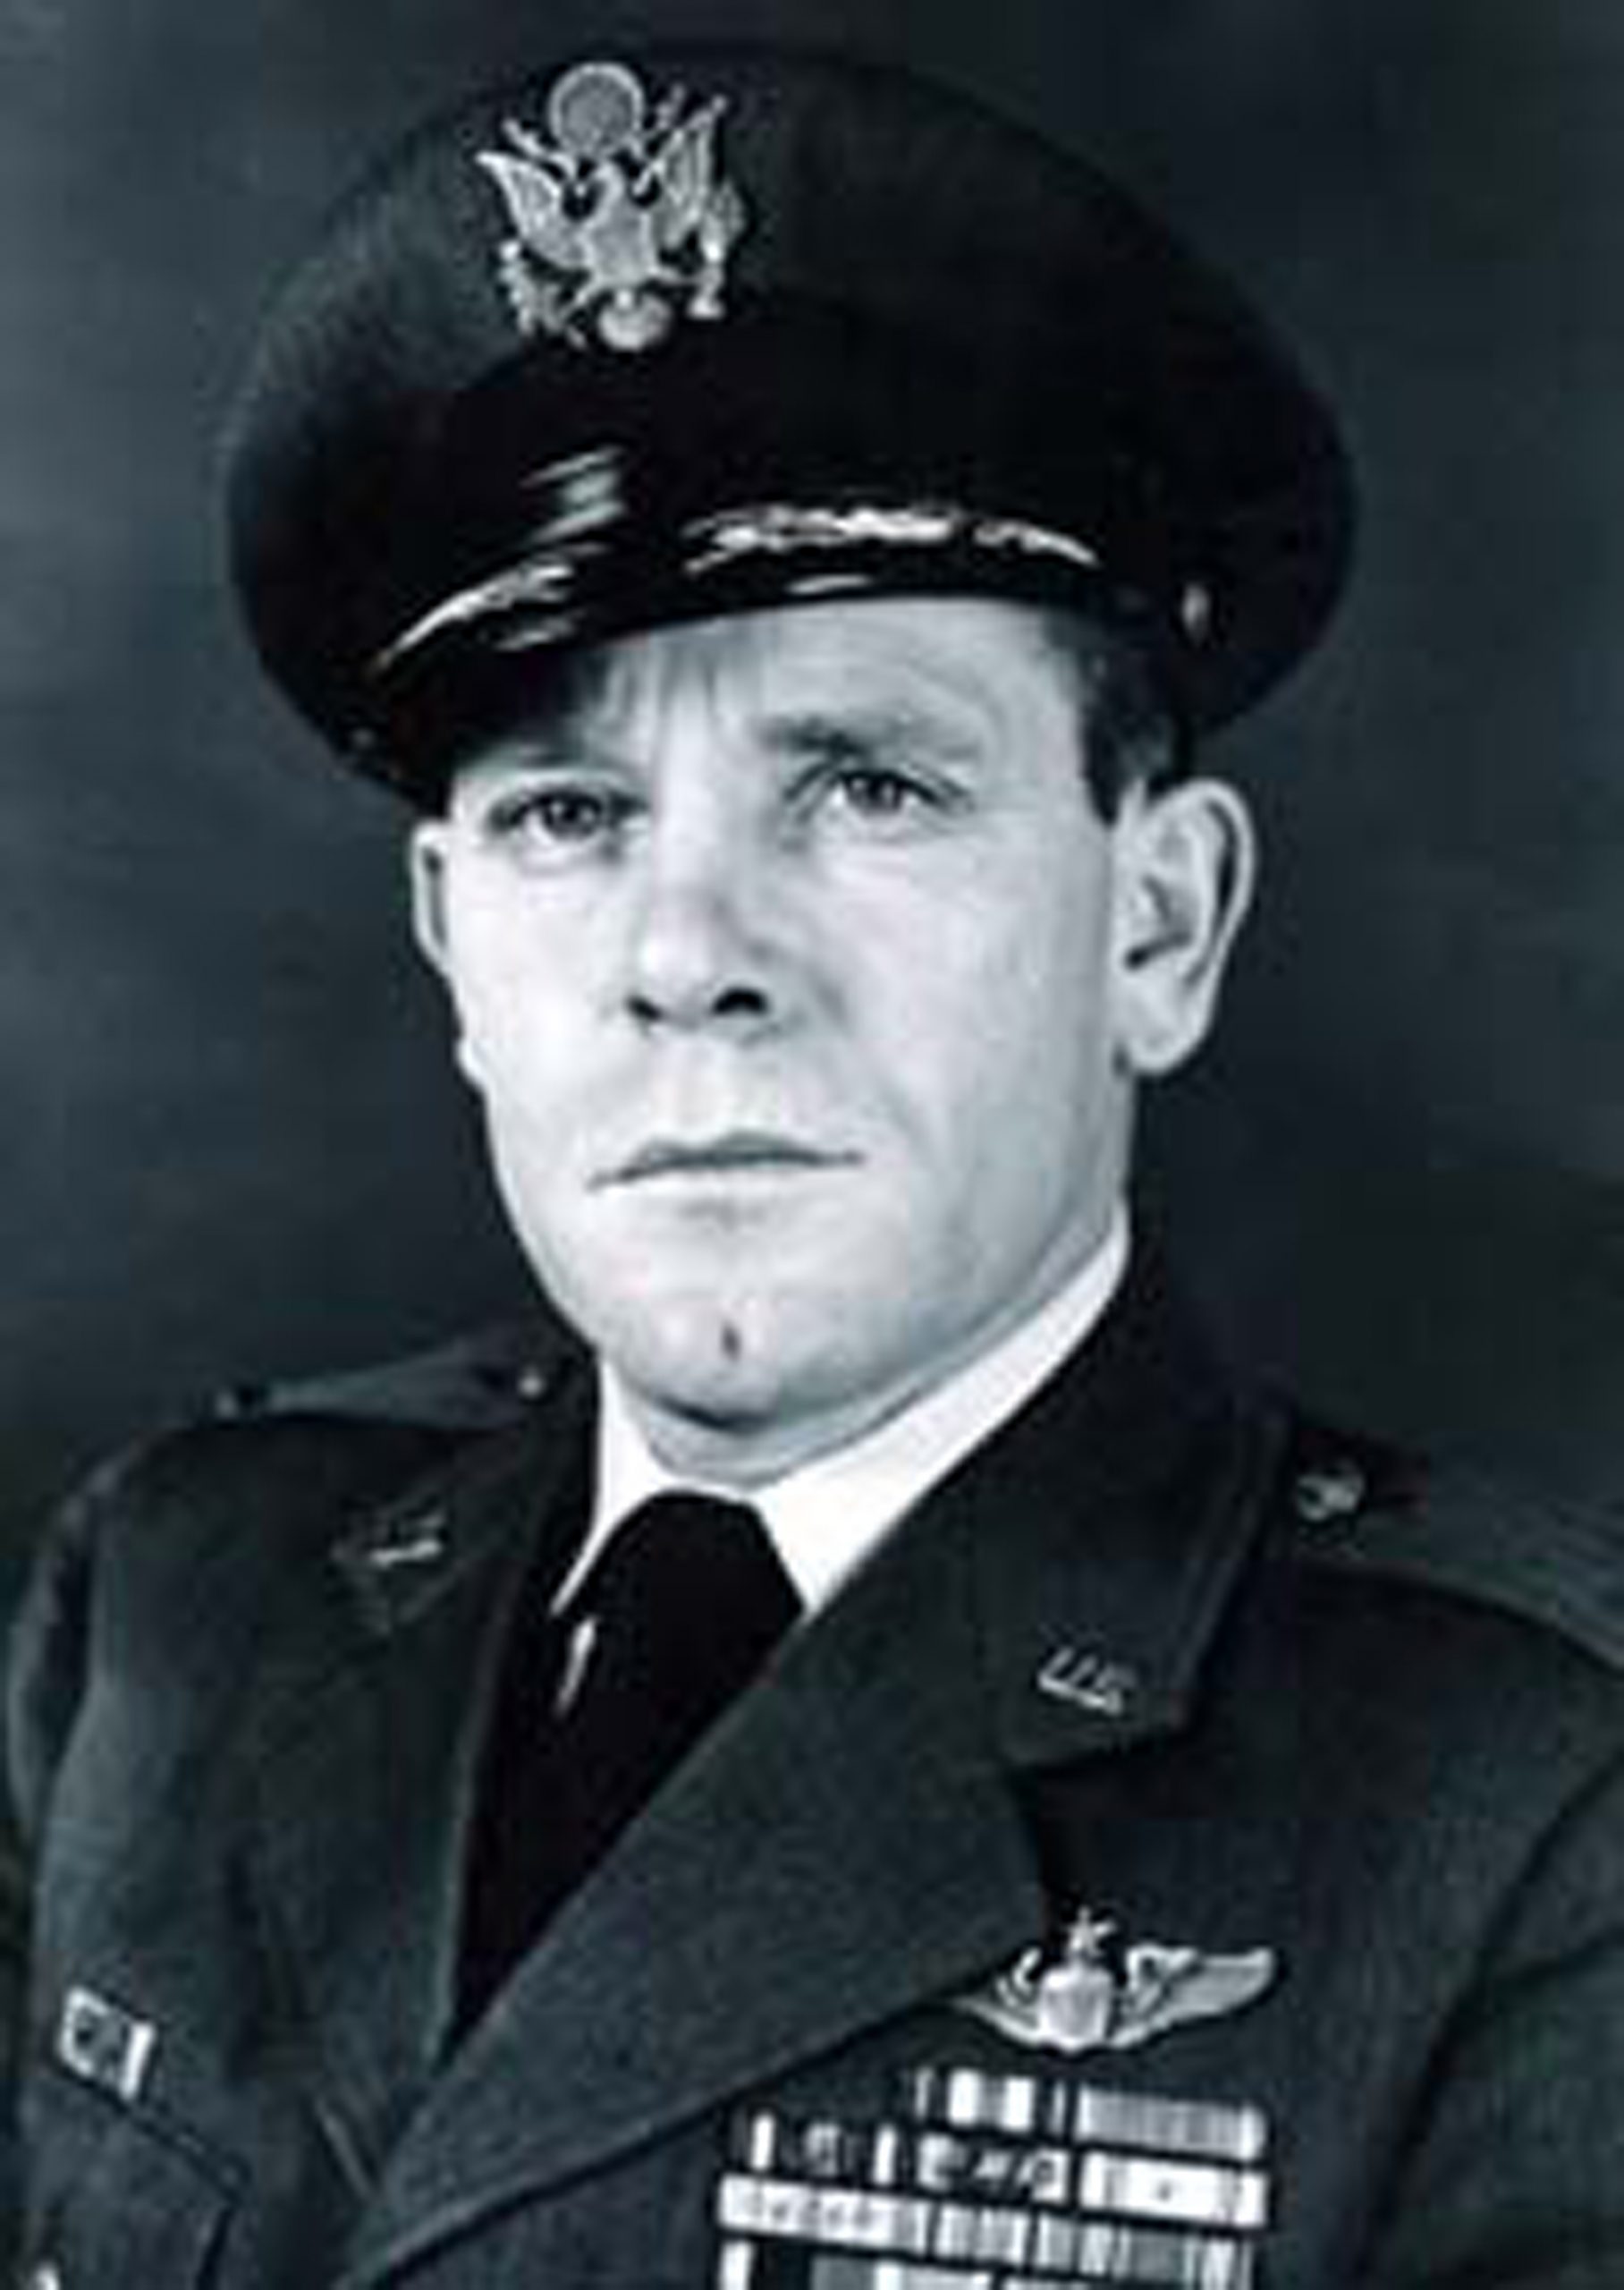 Col. Emmett “Cyclone” Davis was at Pearl Harbor when it was attacked; he was one of the few pilots to take flight immediately following the bombing.